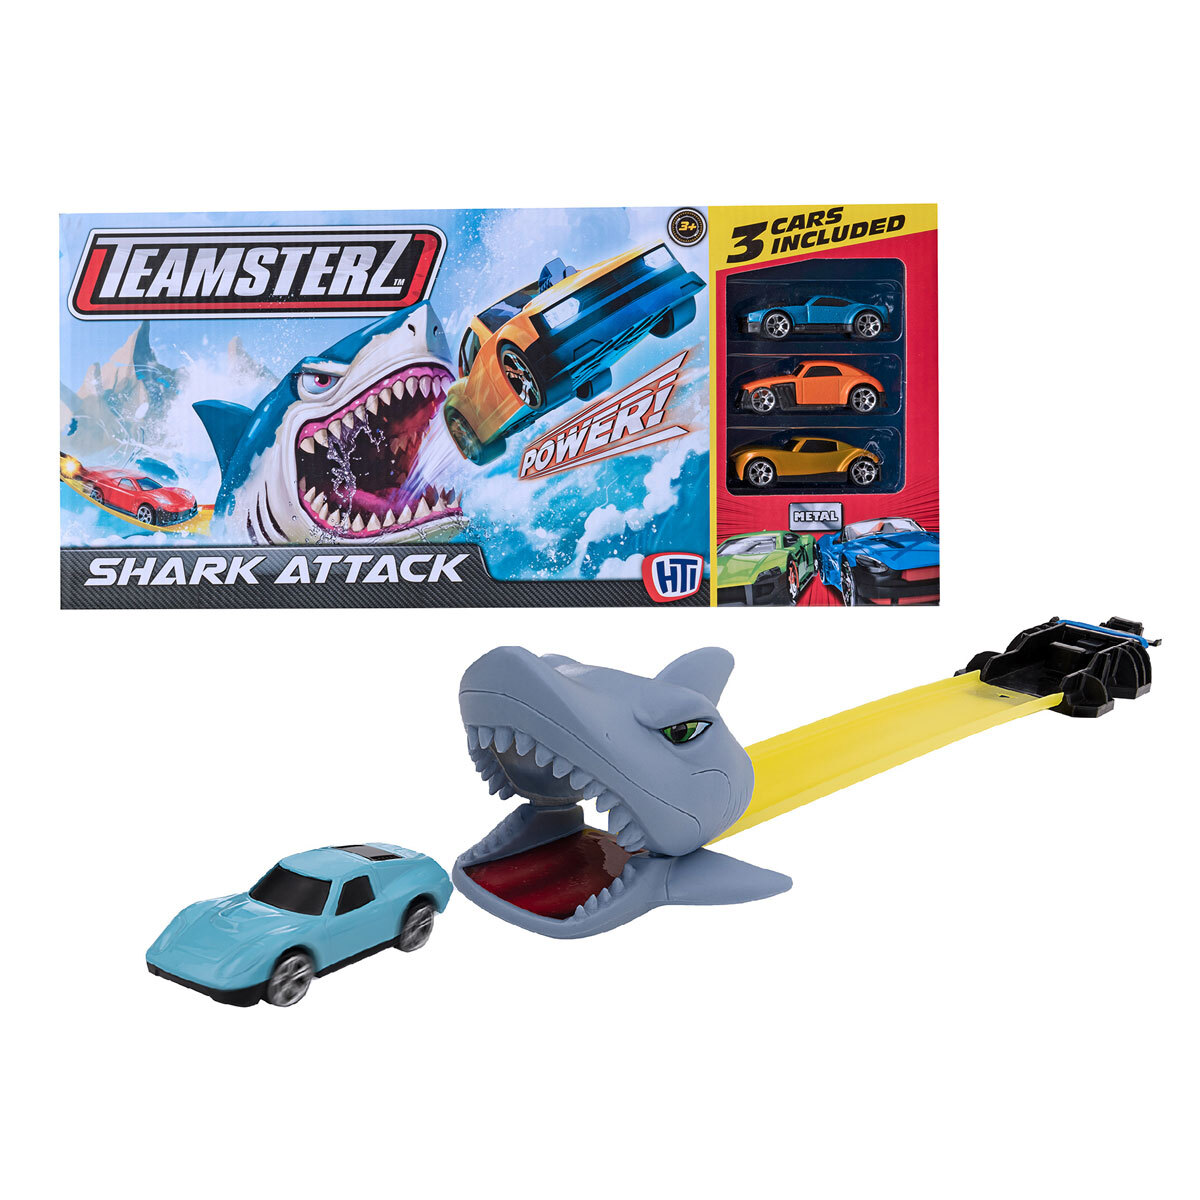 Teamsterz Shark Attack Playset with 3 Cars